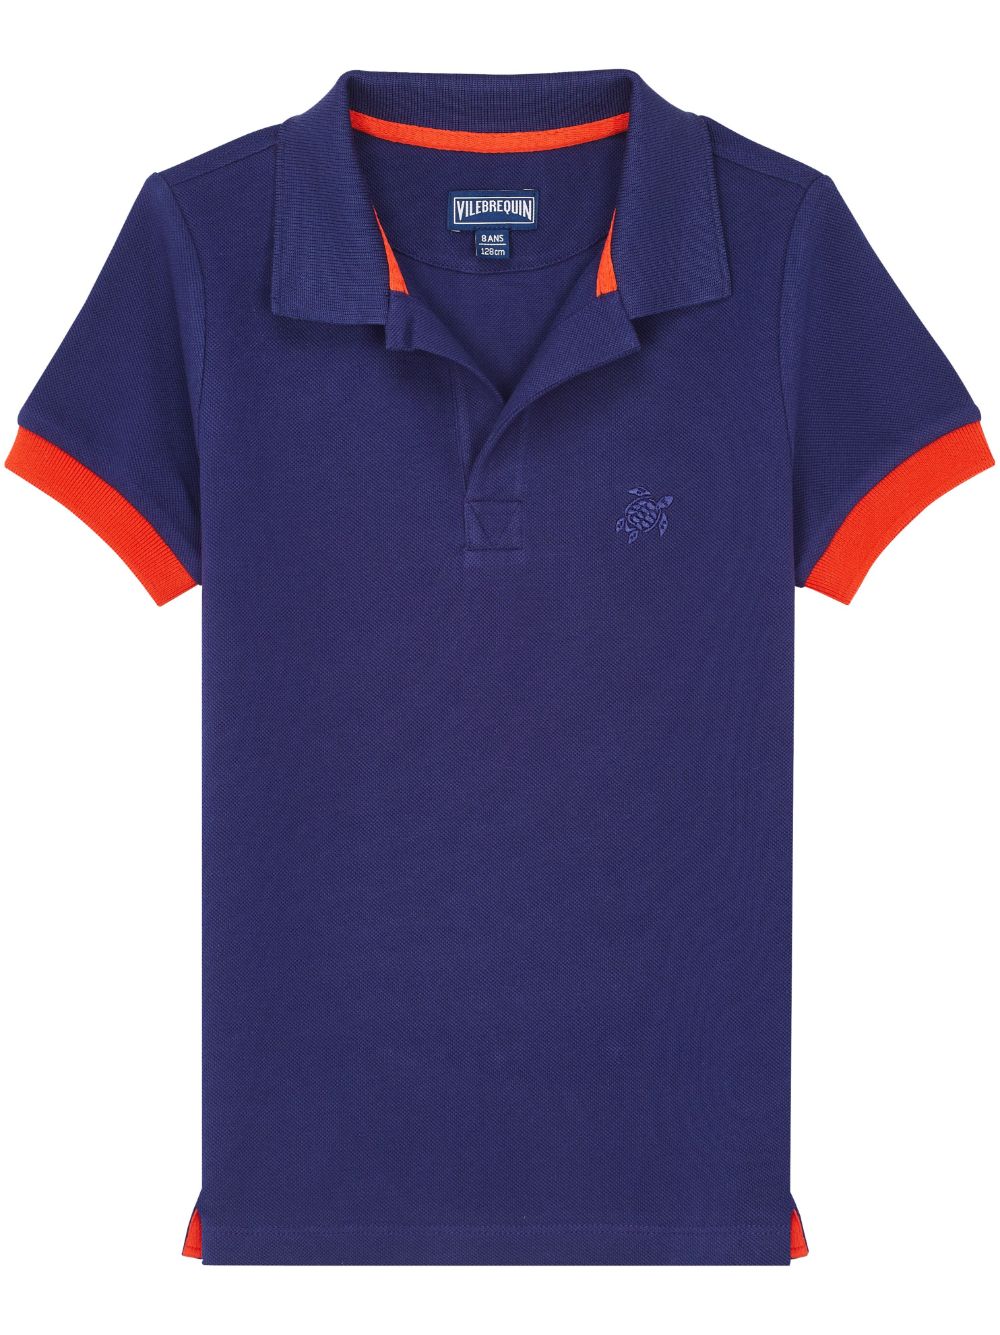 Vilebrequin Kids' Trouserin Cotton Polo Shirt In Blue